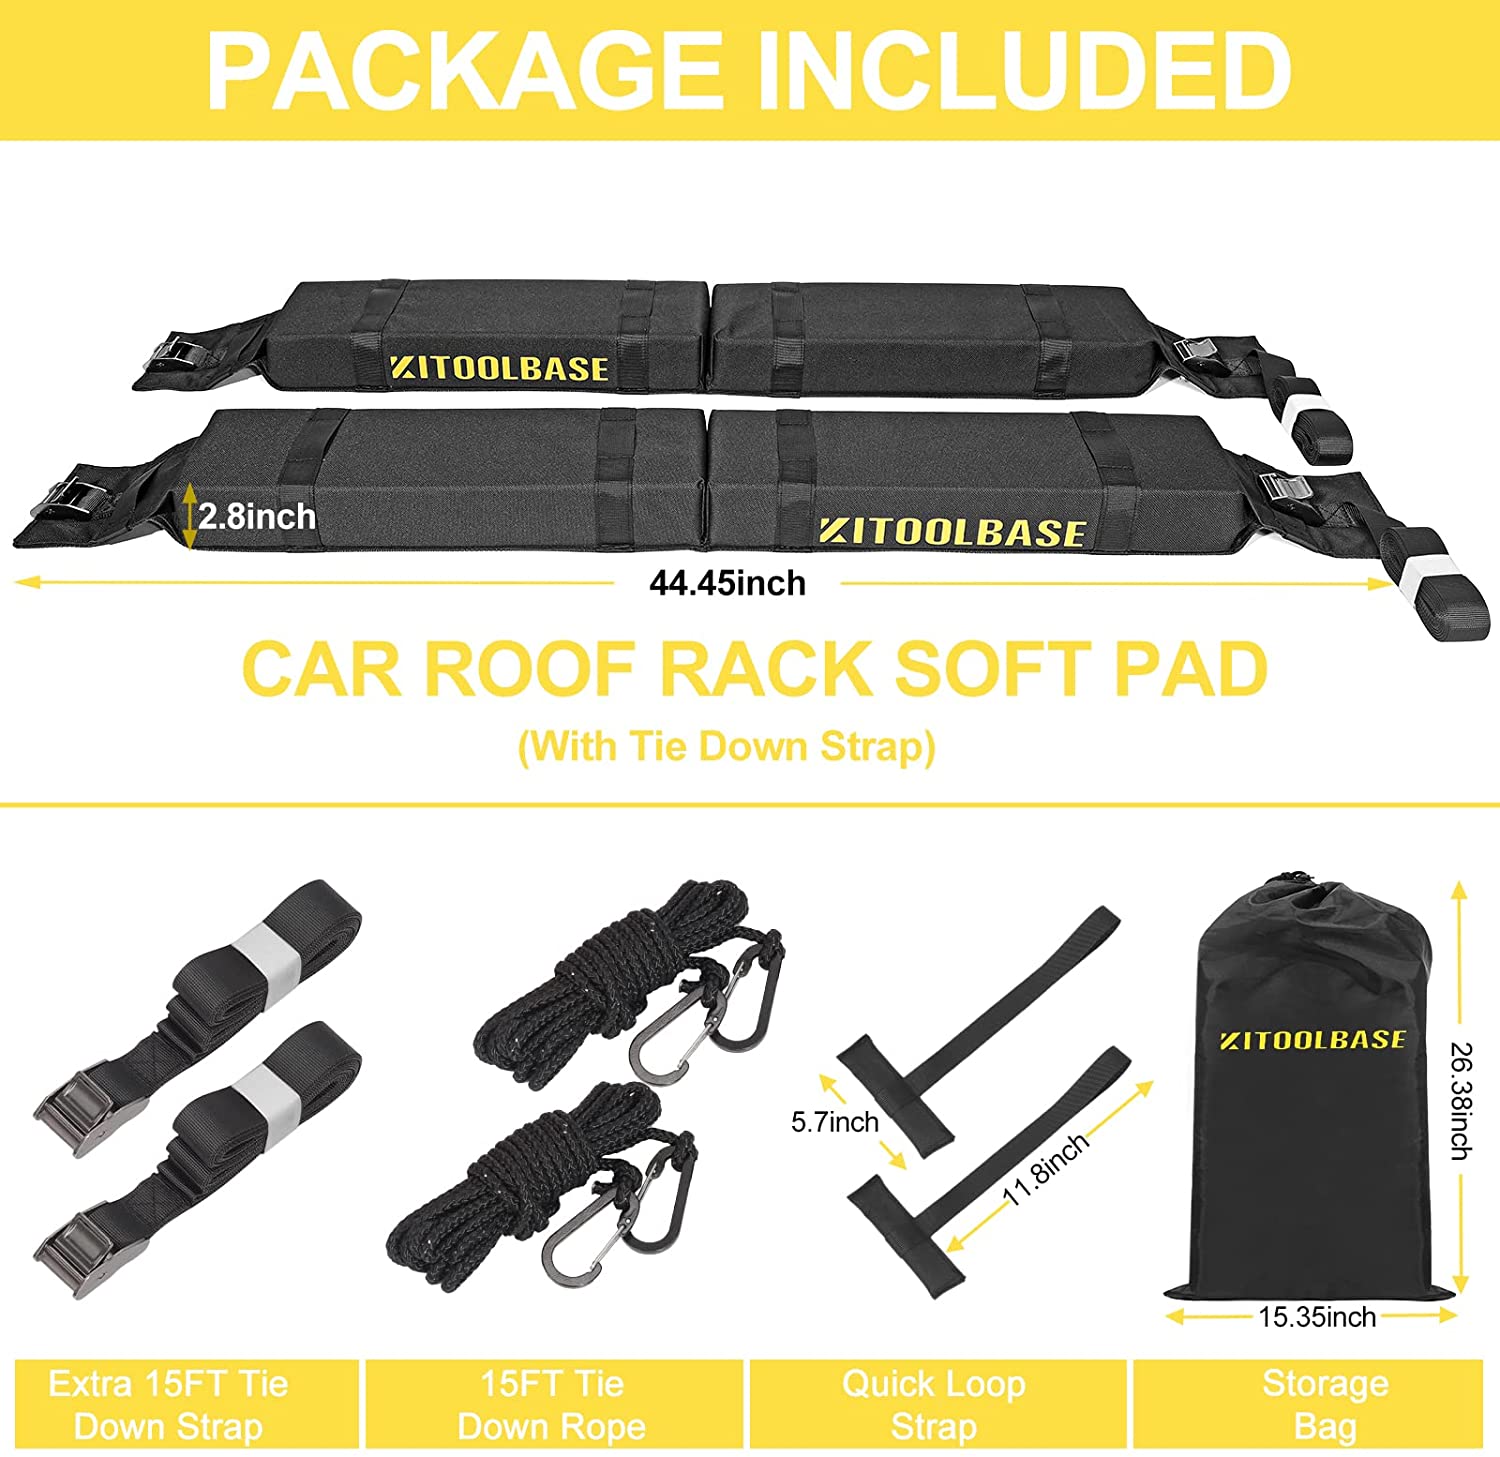 2 Tie Down Rope 2 Quick Loop Strap and Storage Bag Universal Car Soft Roof Rack Pads Luggage Carrier System for Kayak Surfboard SUP Canoe Include 2 Heavy Duty Tie Down Straps 